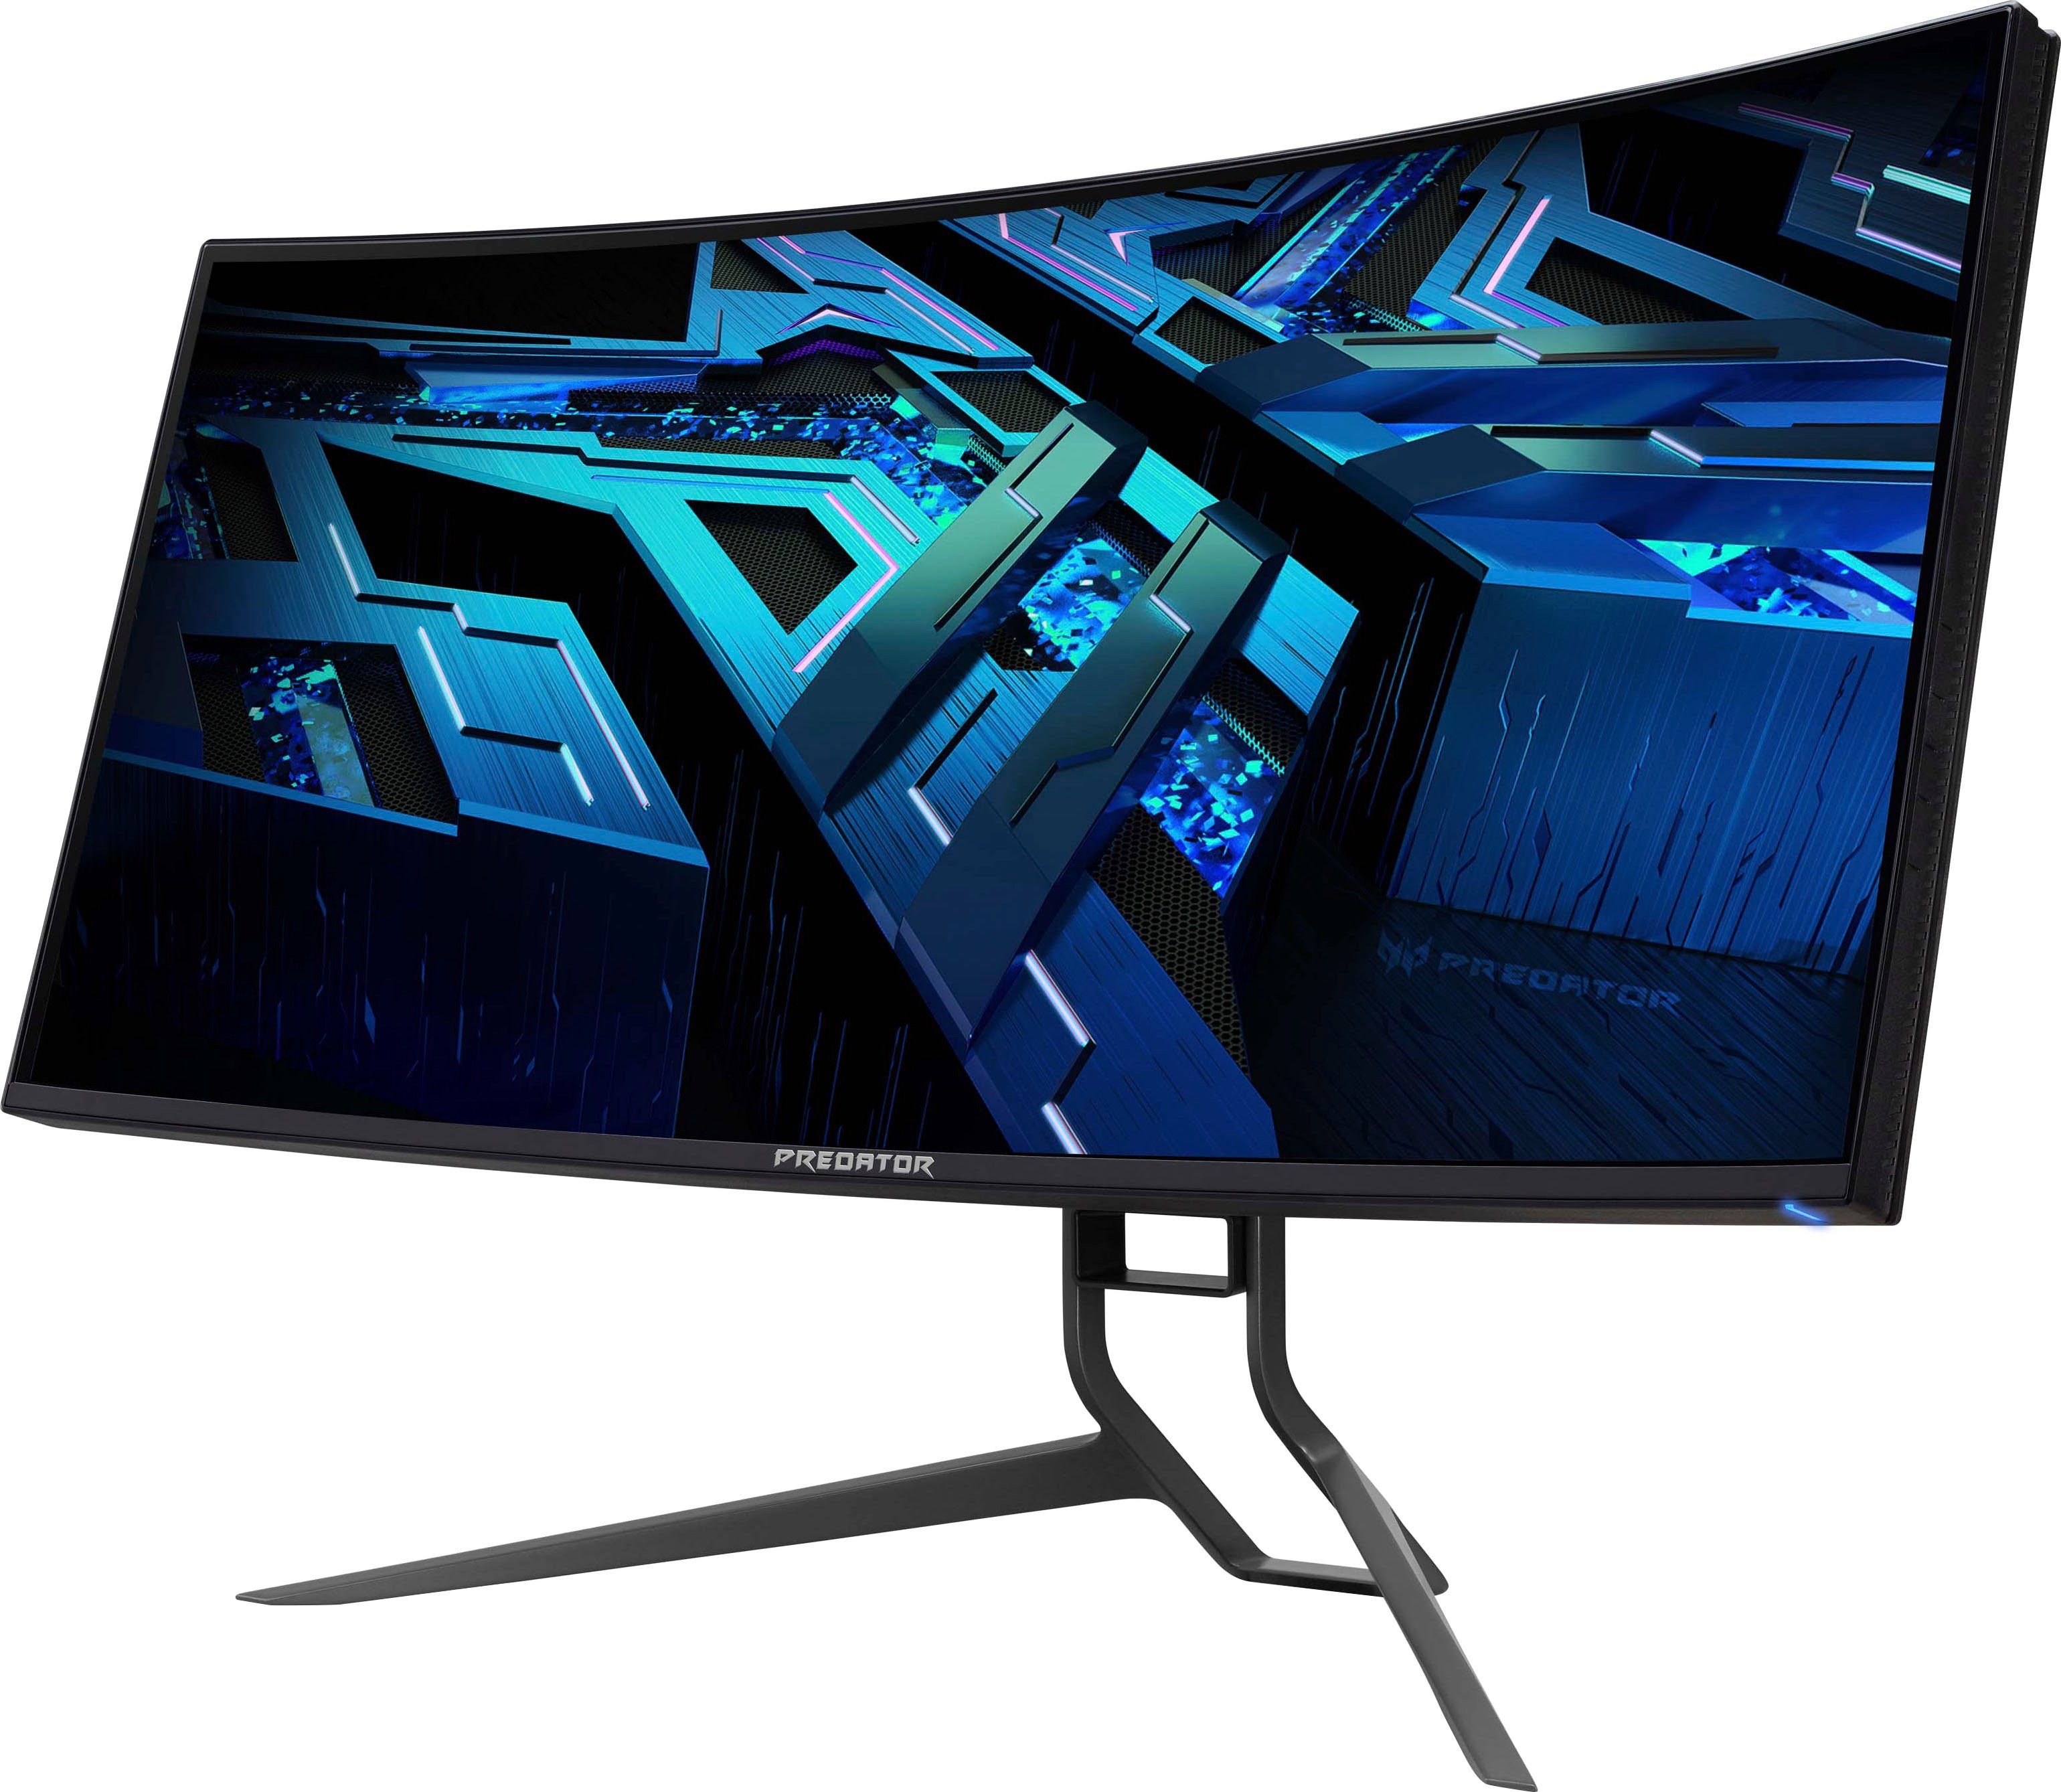 px, (86,4 IPS-LED) Hz, 180 Predator x Acer 0,5 ms 1440 X34GS Curved-Gaming-LED-Monitor Reaktionszeit, ", 3440 cm/34